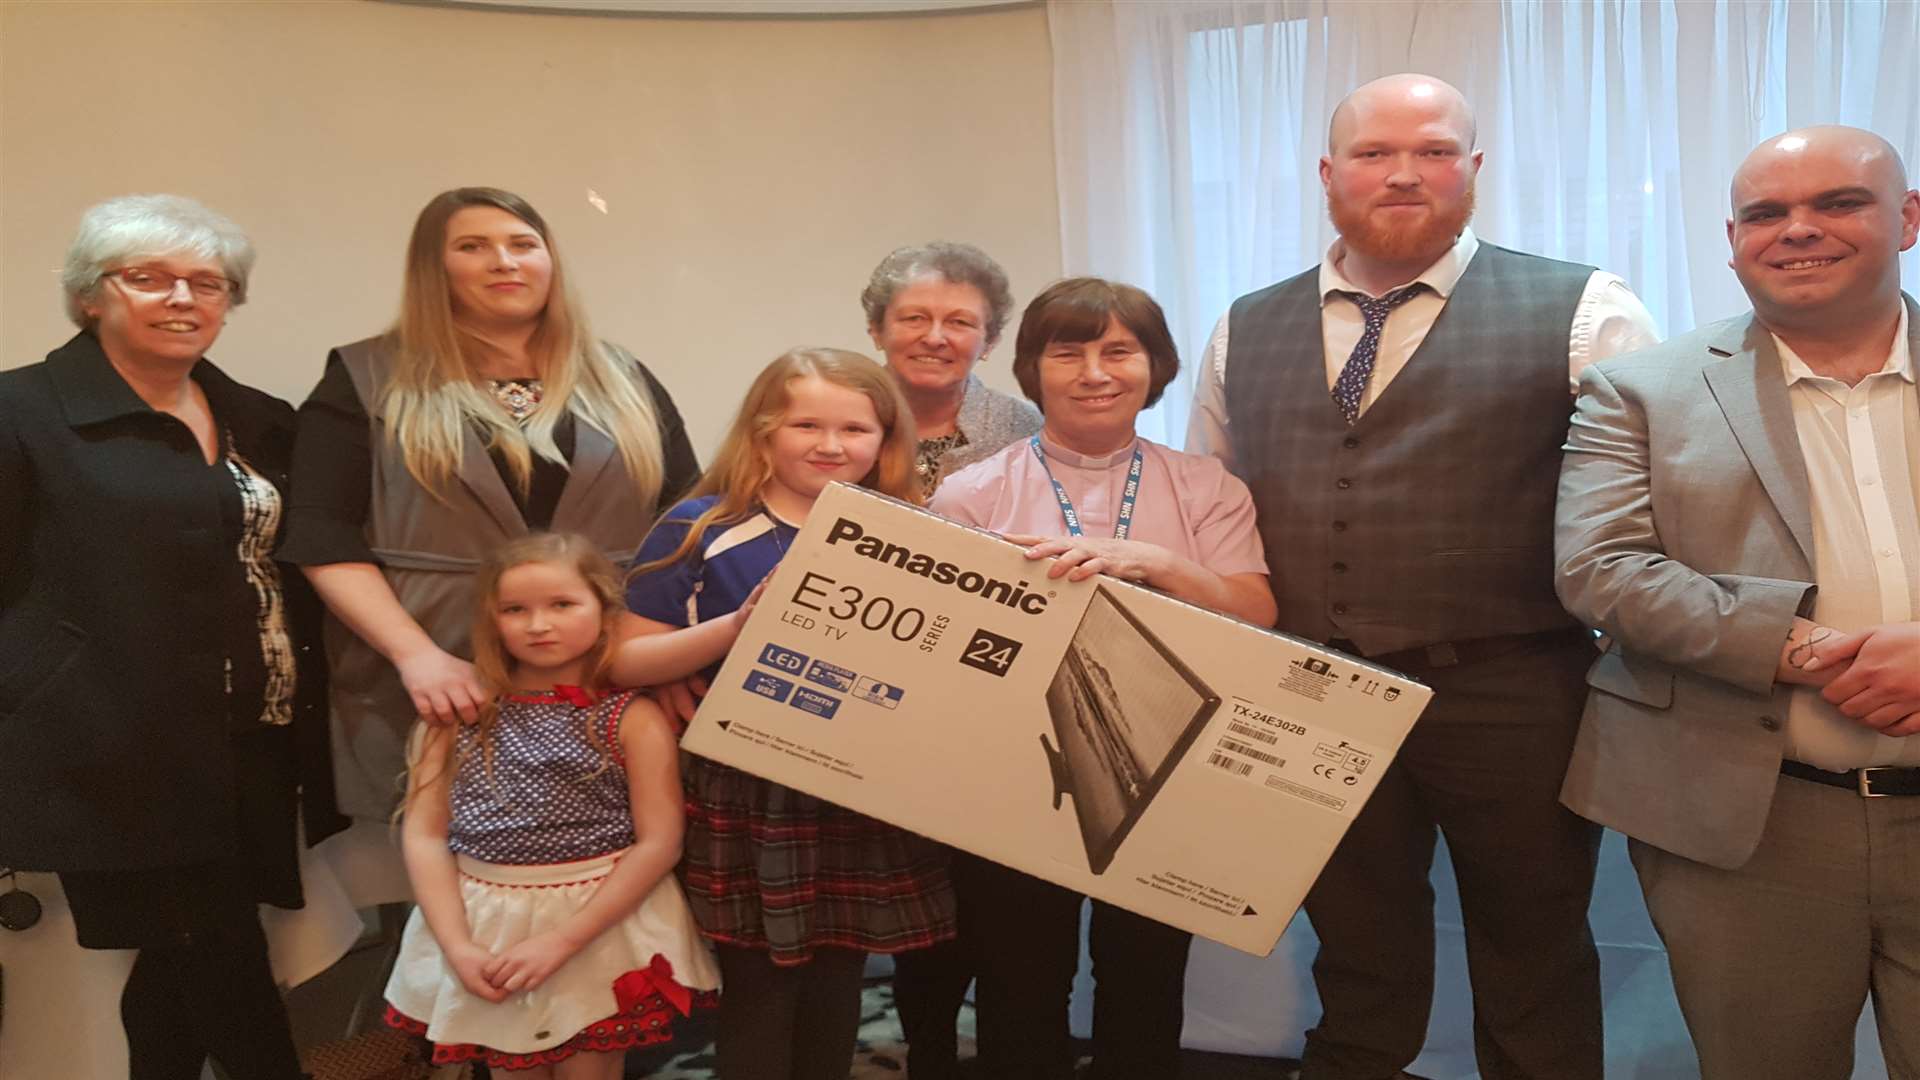 The television was presented to Medway Maritime hospital